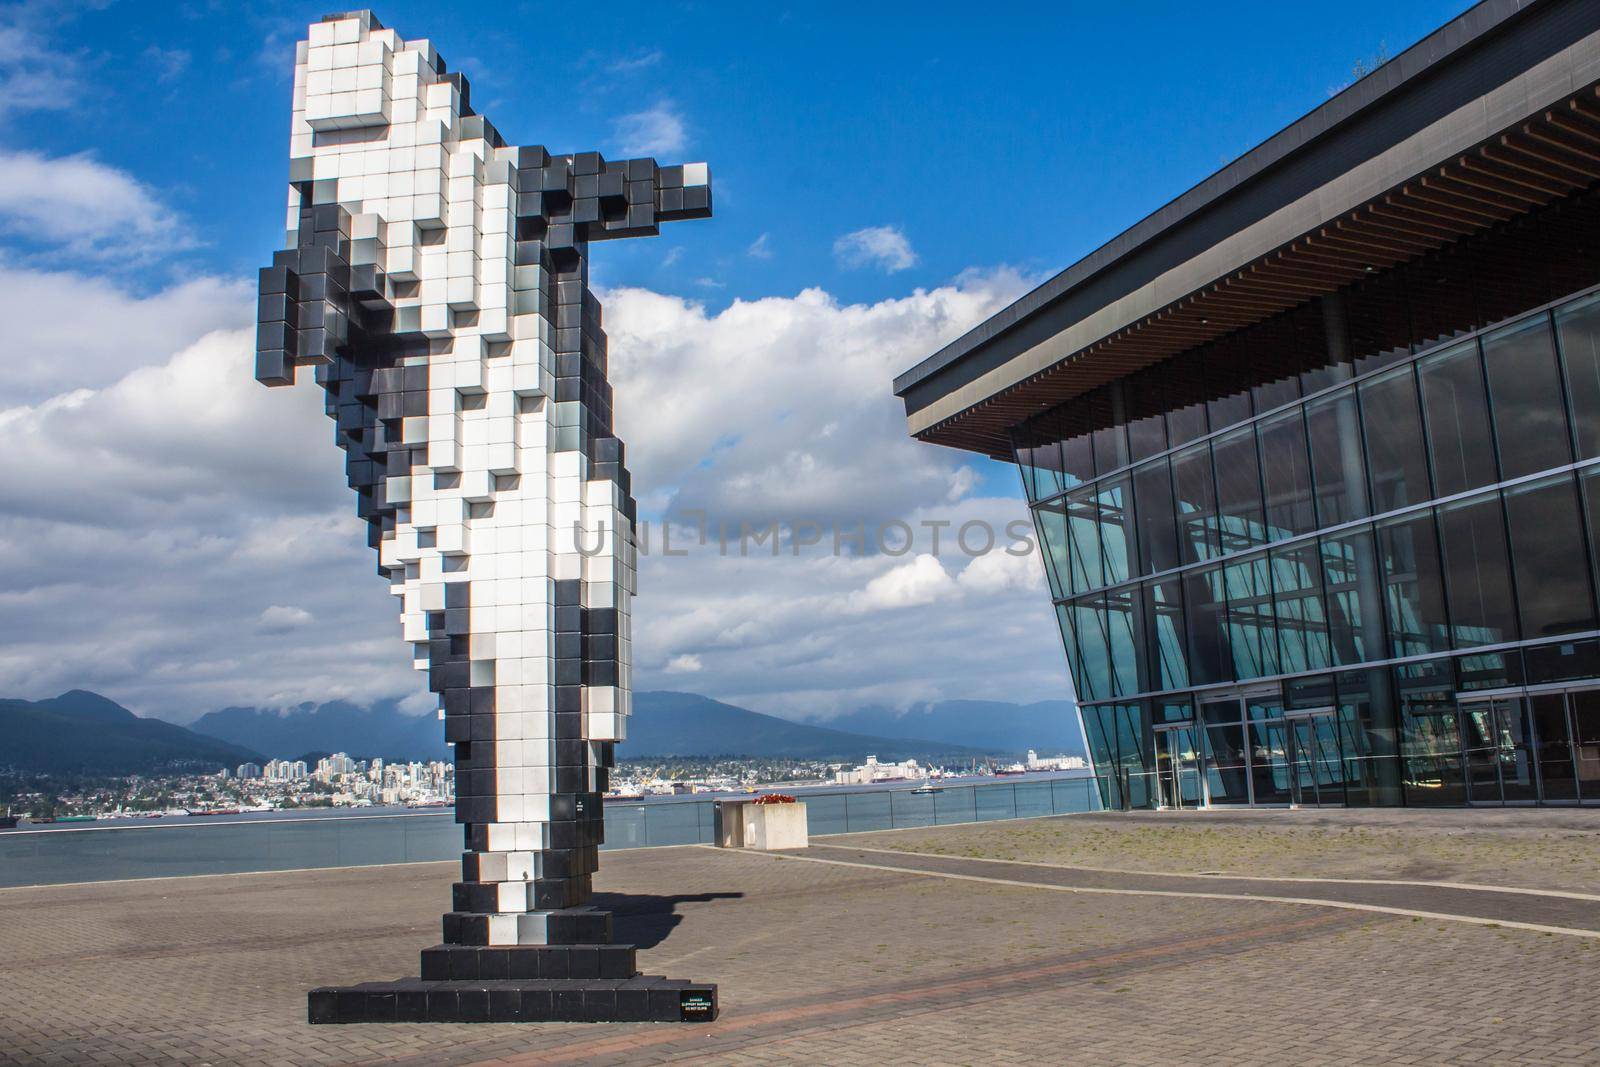 Vancouver, British Columbia, Canada September 2, 2020 . The aluminium sculpture Digital Orca of a Orca whale by the artist Douglas Coupland, installed next to Convention Centre in Vancouver.